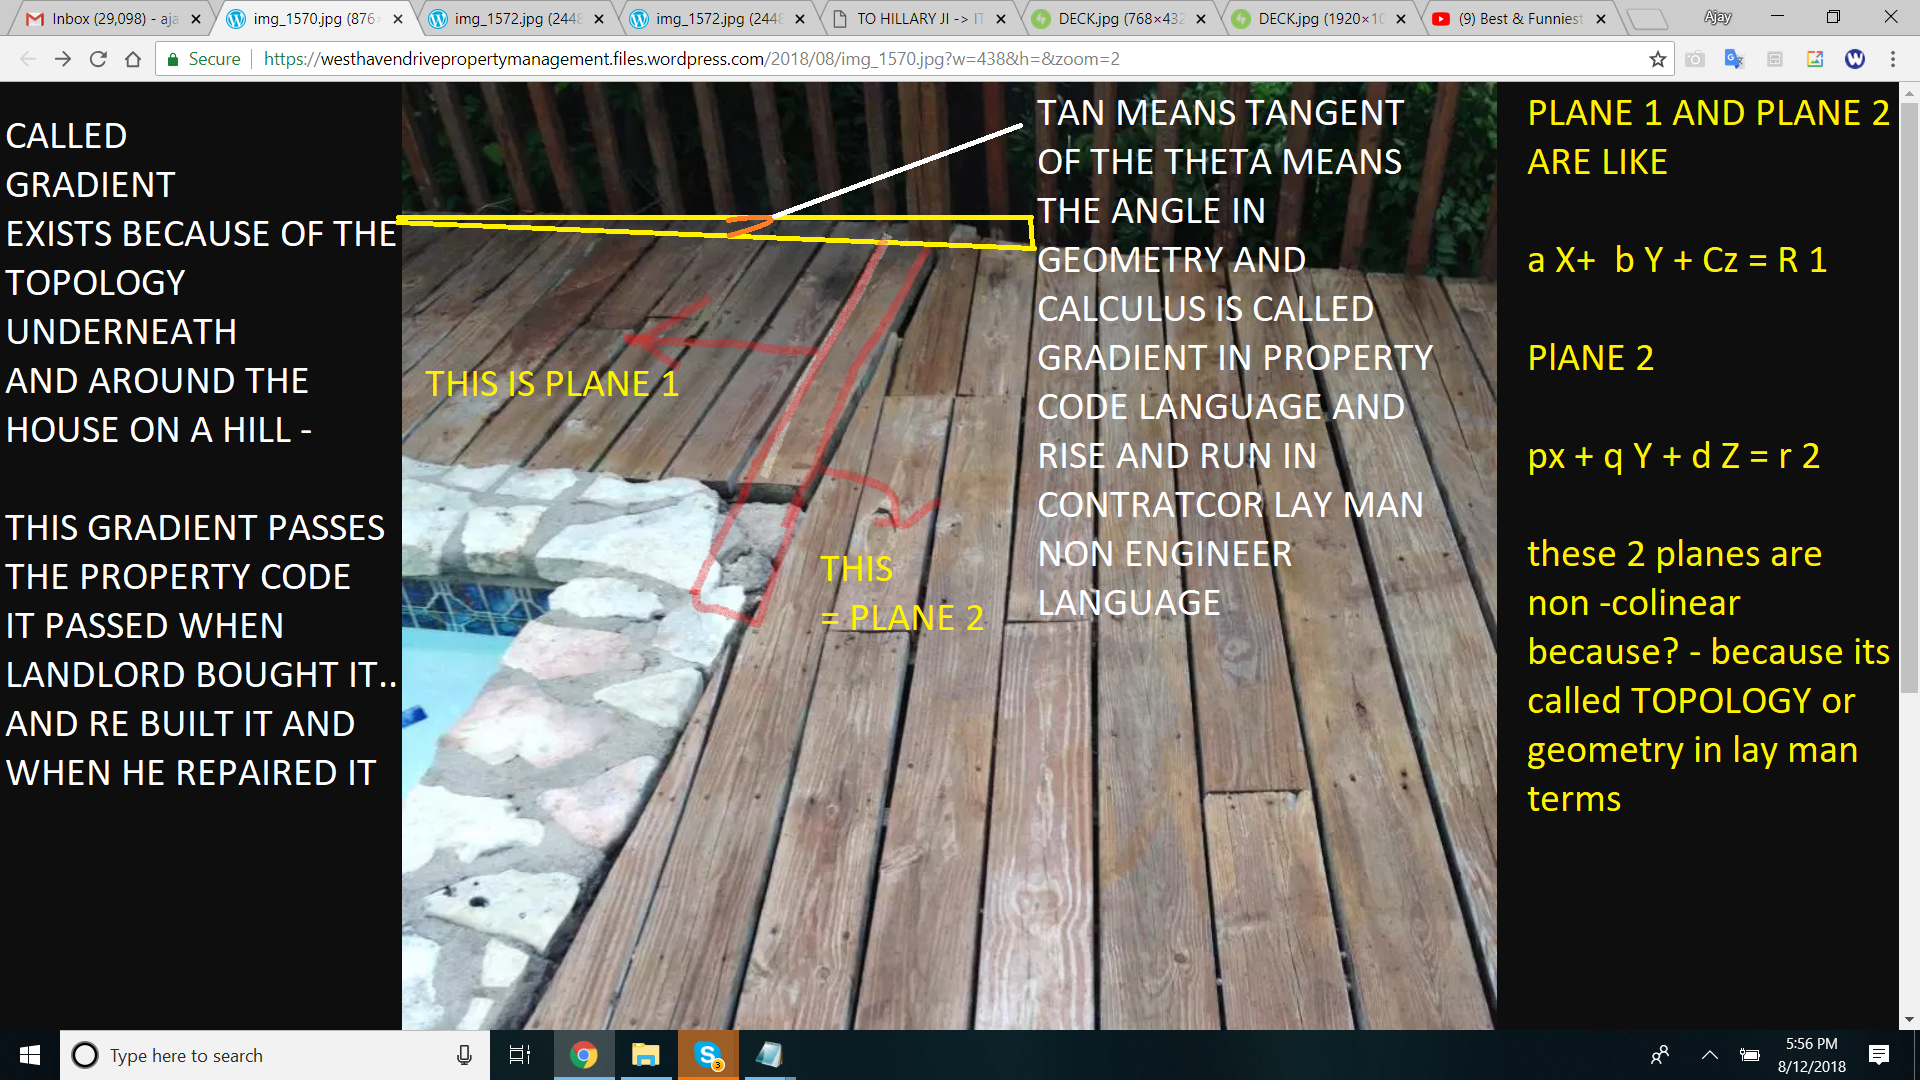 TAN MEANS TNGENT OF THE THETA MEANS THE ANGLE IN GEOMETRY AND CALCULUS IS CALLED GRADIENT IN PROPERTY CODE LANGUAGE AND RISE AND RUN IN CONTRATCOR LAY MAN NON ENGINEER LANGUAGE